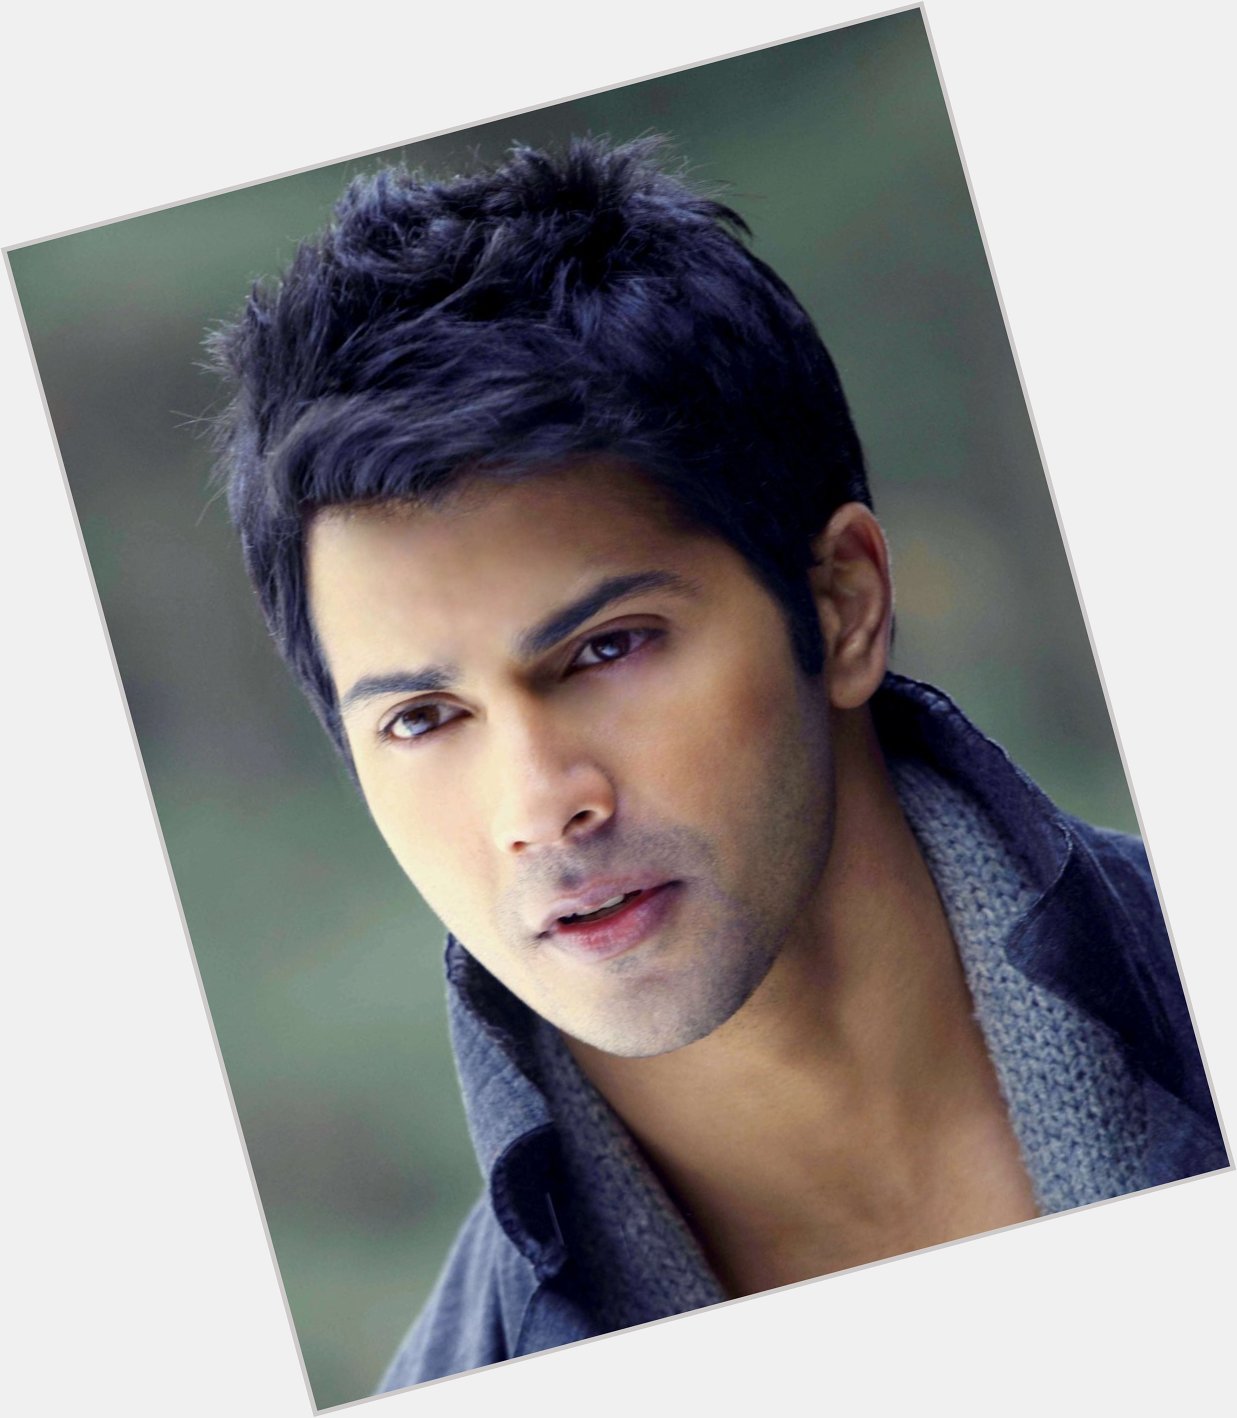 Varun Dhawan April 24 Sending Very Happy Birthday Wishes! Continued Success!  